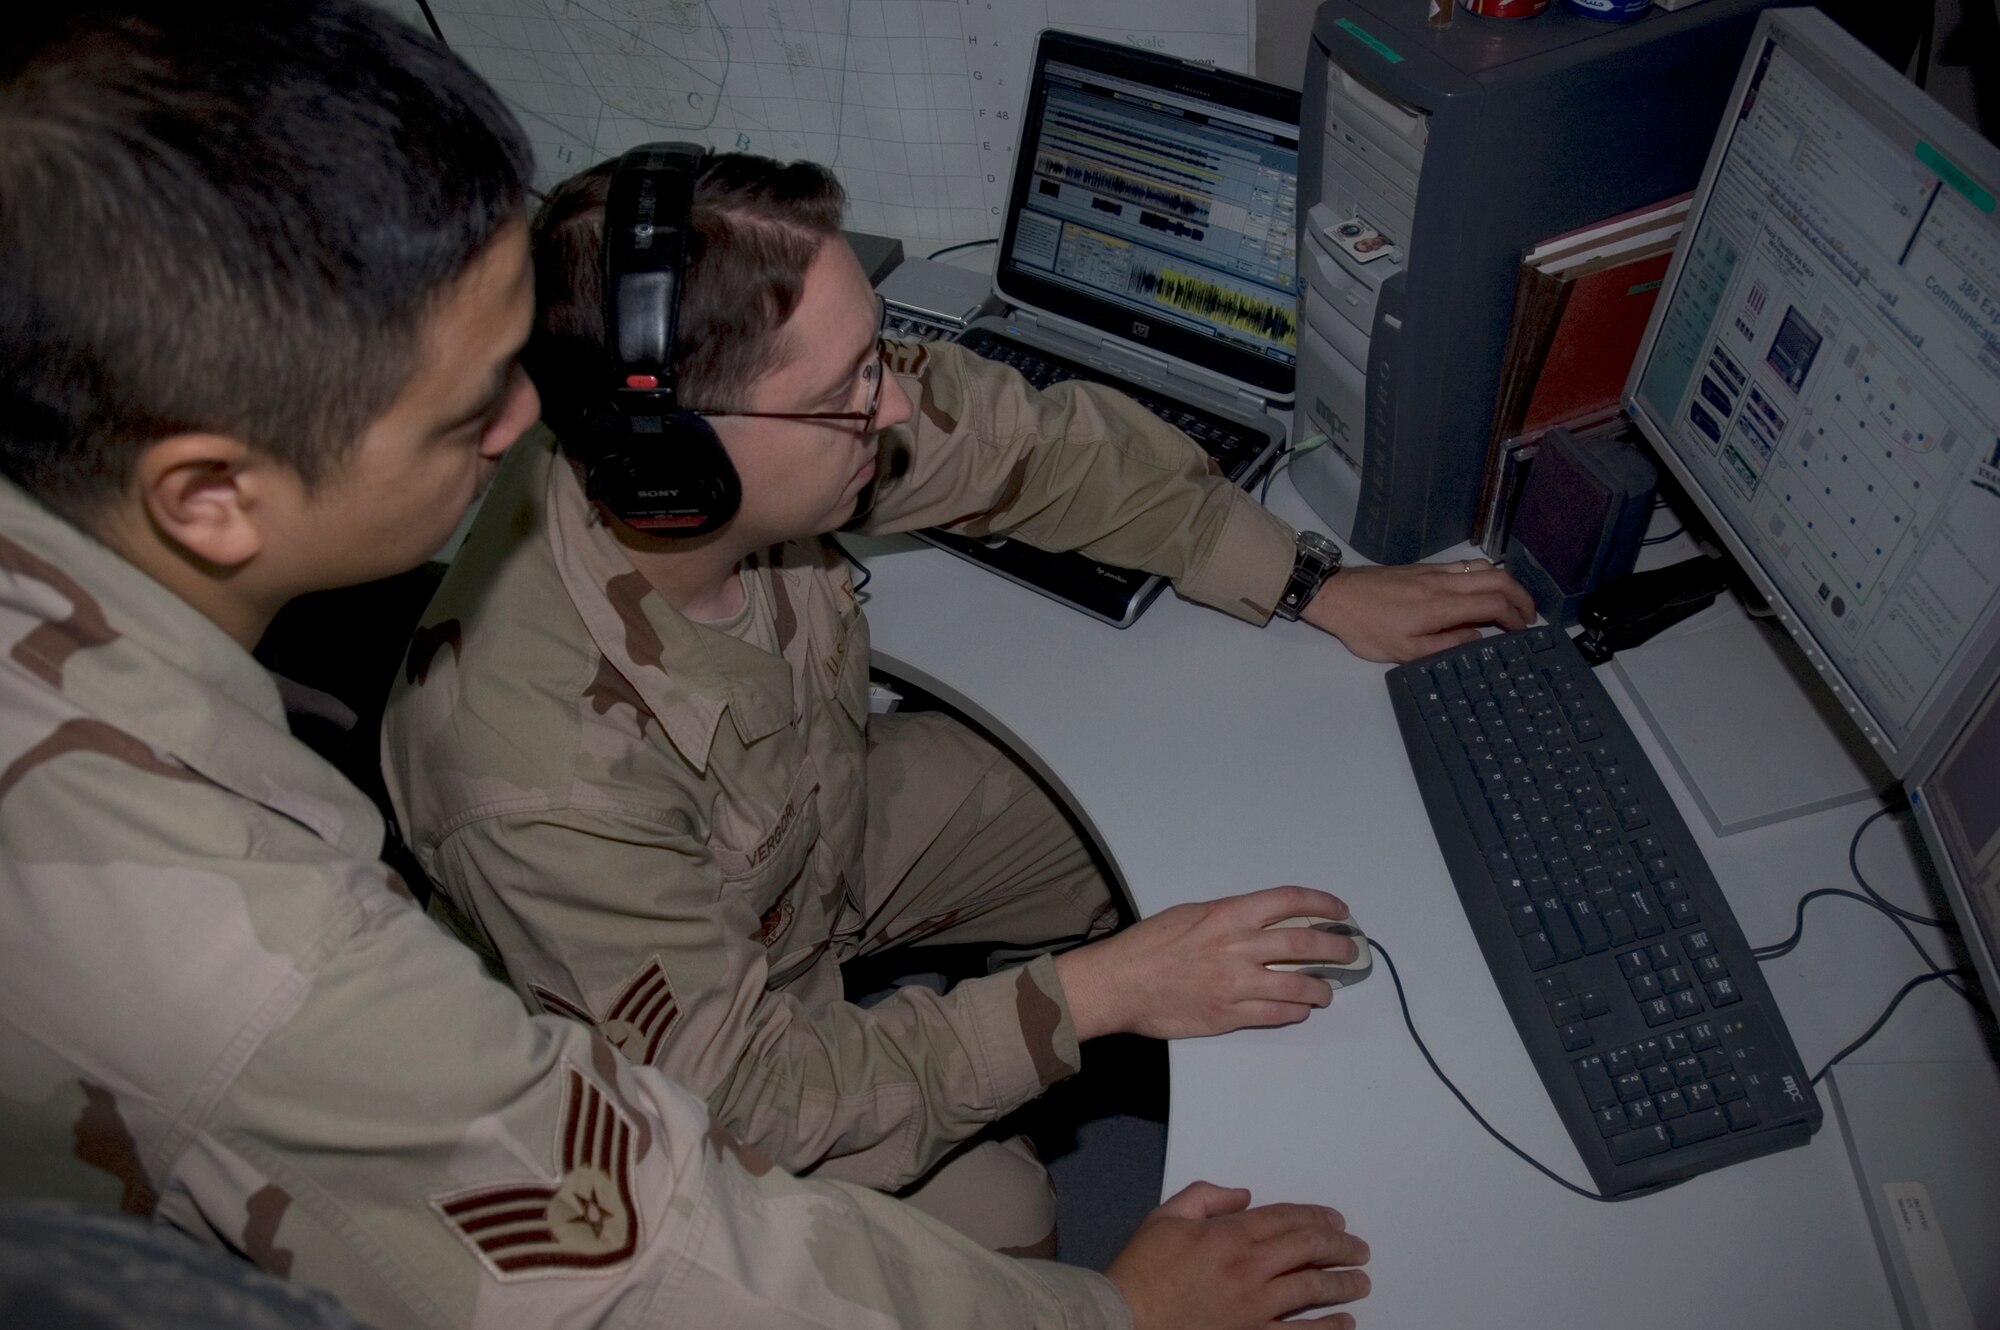 SOUTHWEST ASIA -- Staff Sgt John Lontoc and Staff Sgt Timothy Vergori perform post production maintenance on an audio editing system here on September 13.  Sgt Vergori is the NCOIC of ground mobile radio and visual imagery intrusion detection system (VIIDS) and deployed from Robbins Air Force Base, GA, and Sgt. Vergoni is a VIIDS technician deployed from Spangdahlem Air Base, Germany.  Both are assigned to the 386th Expeditionary Communications Squadron.  (U.S. Air Force photo by Staff Sgt. Tia Schroeder)